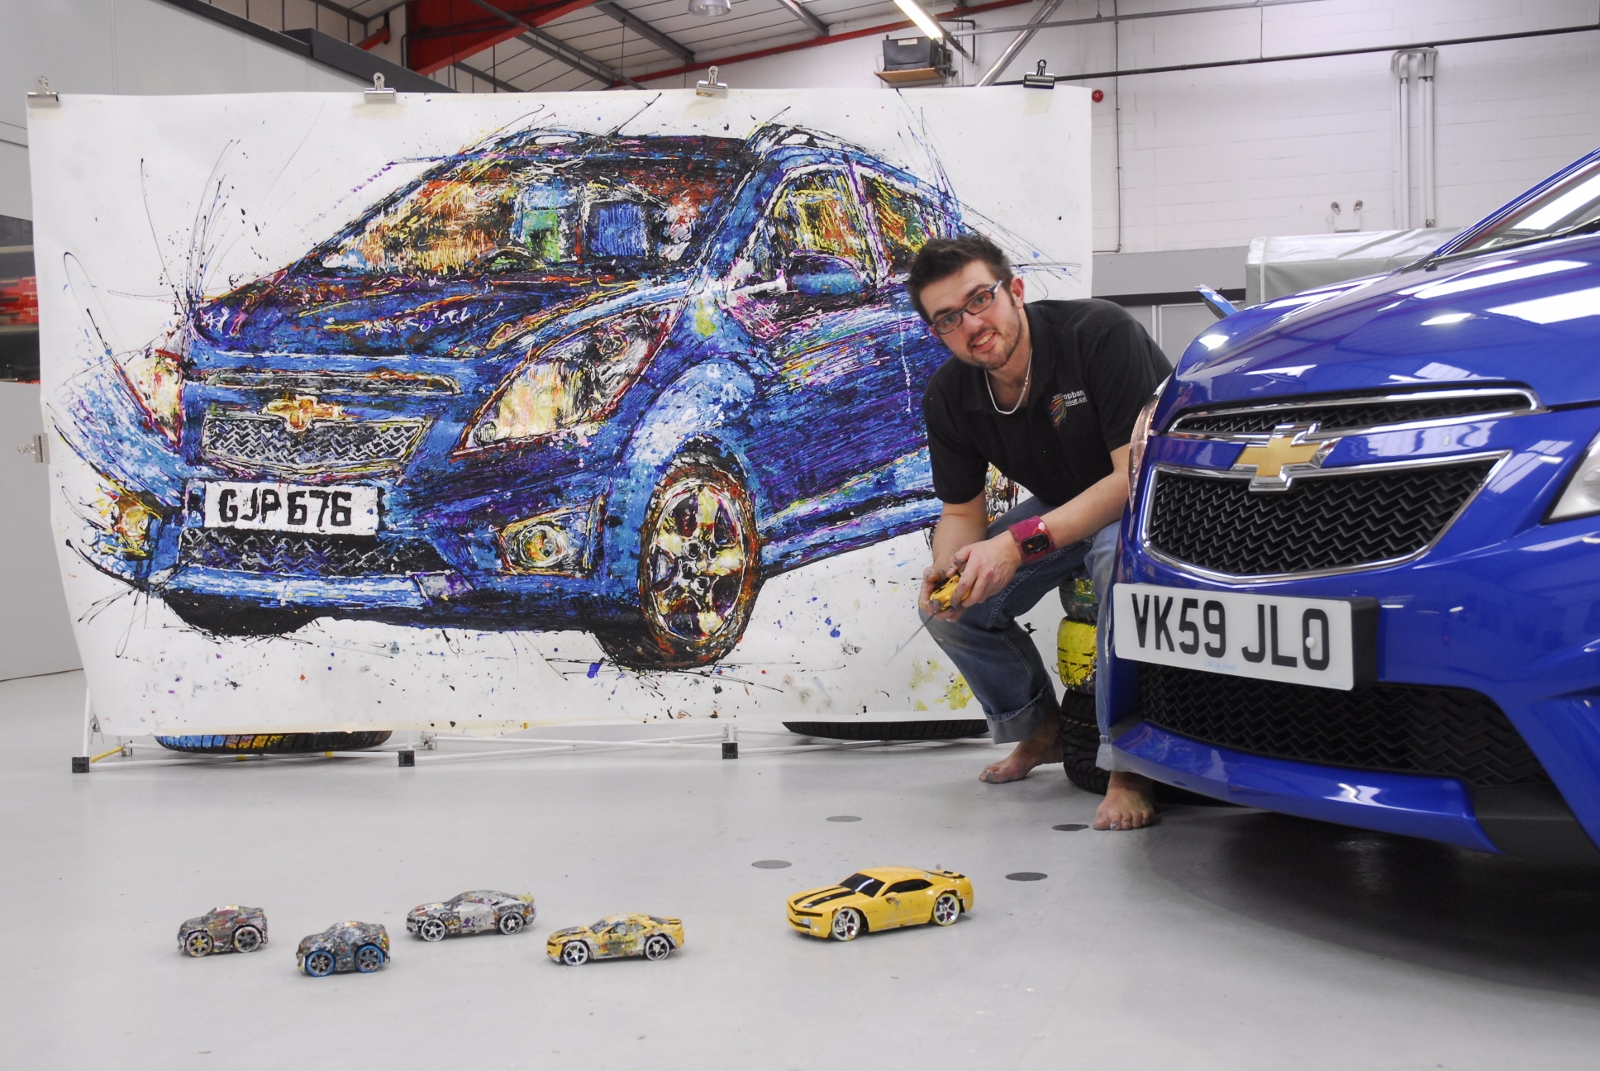 Painting with radio controlled cars and artist Ian Cook is sure to 